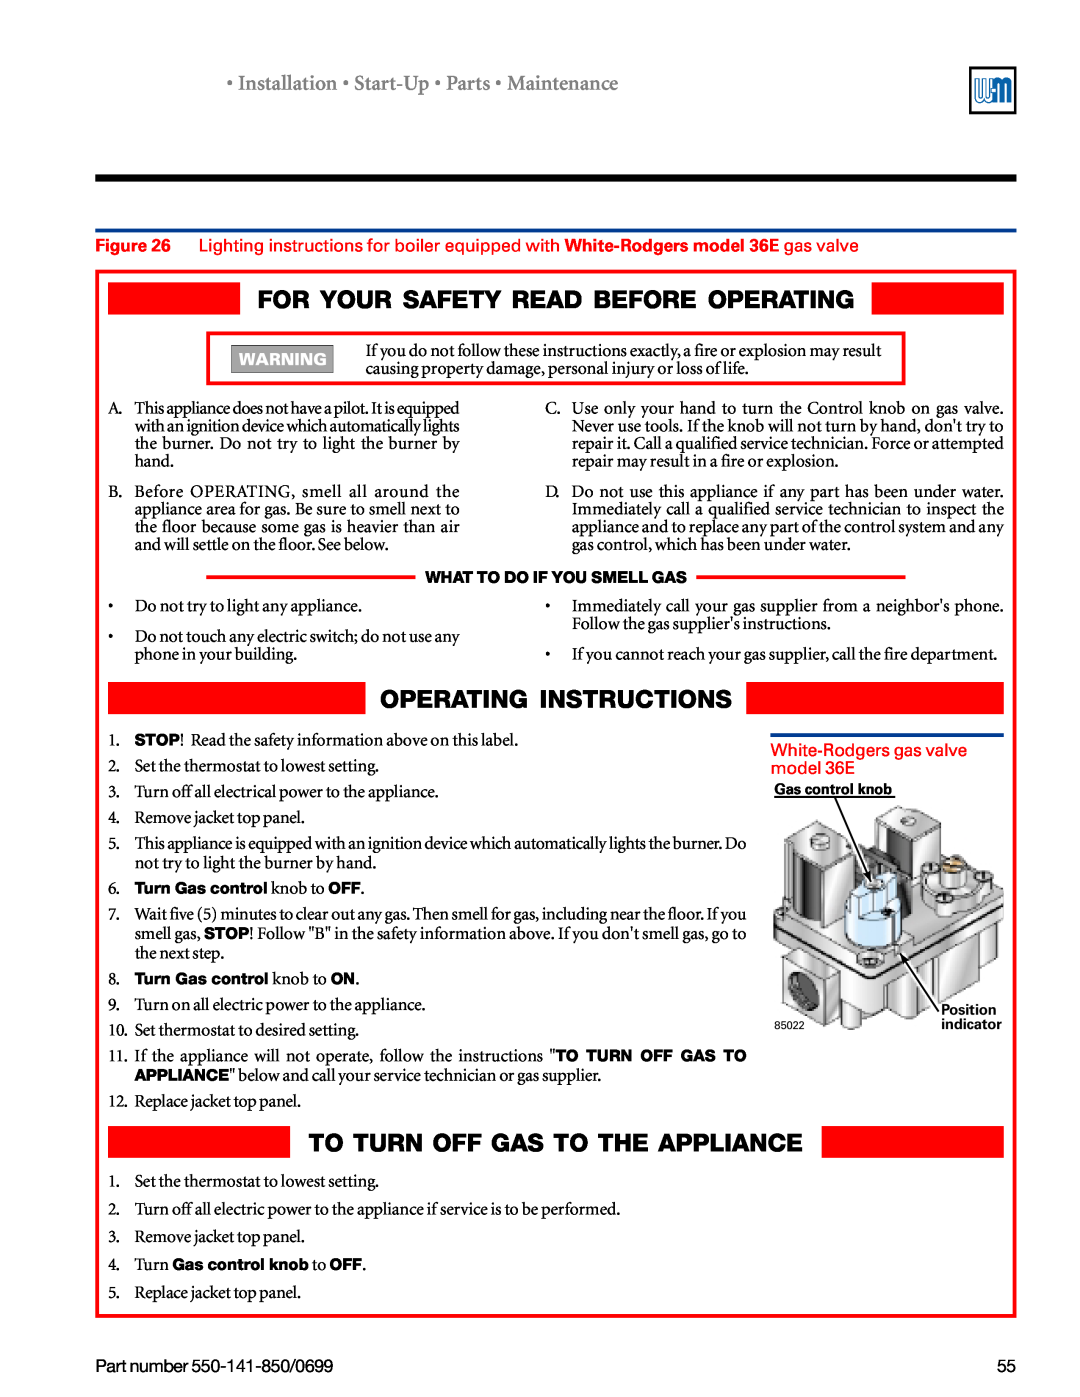 Weil-McLain 550-141-850/0599, GOLD DV WATER BOILER manual For Your Safety Read Before Operating, Operating Instructions 